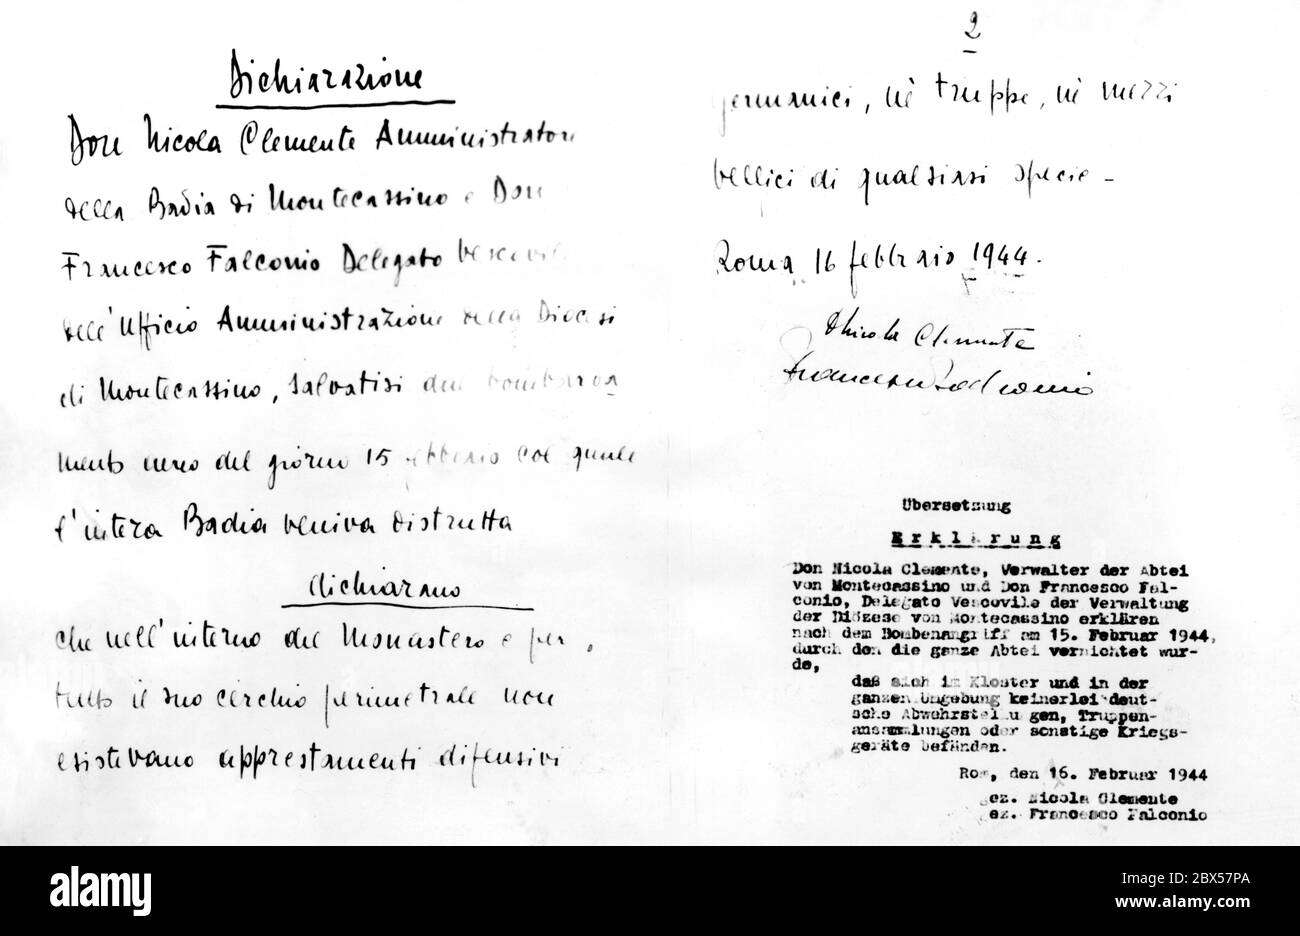 Written declaration by the caretakers of the Abbey of Montecassino, according to which there were no German troops in the monastery at the time of the Allied air raid. Italian original with German translation, dated February 16, 1944. Stock Photo